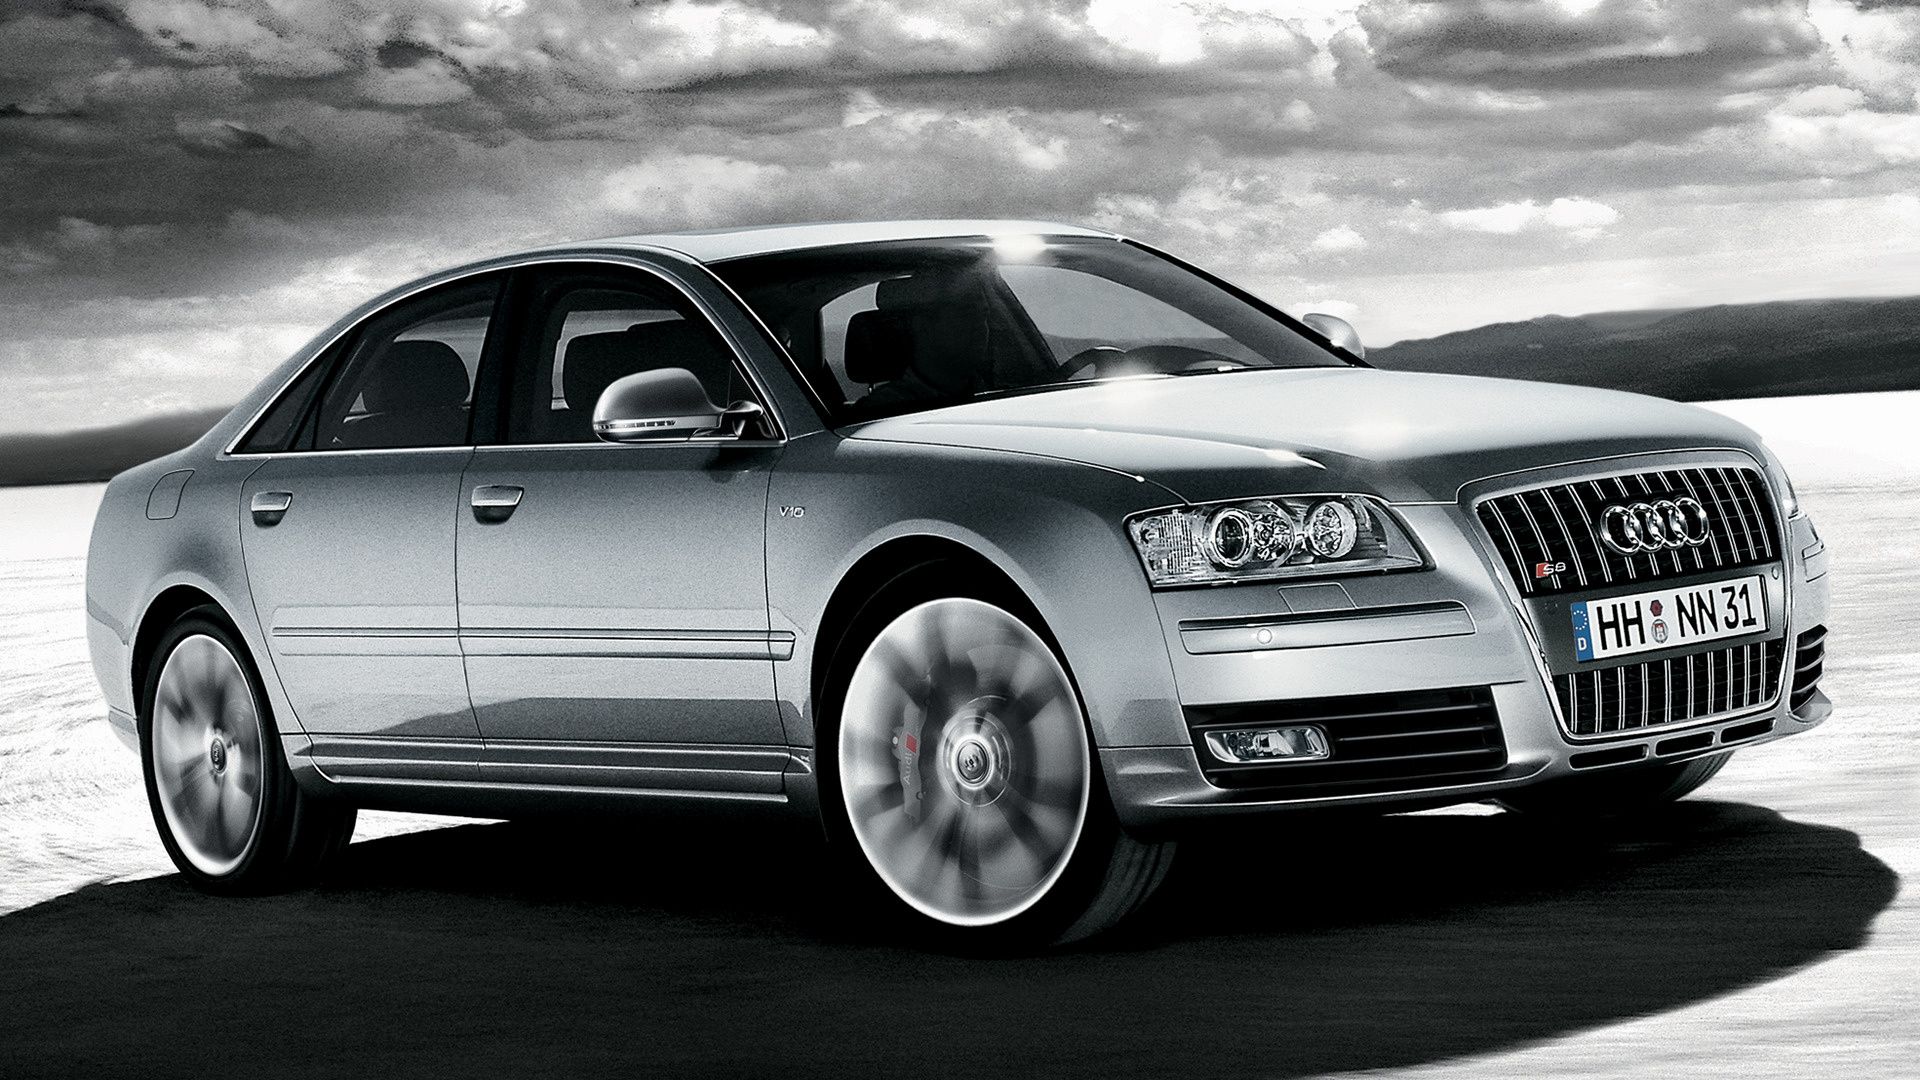 Audi S8 and HD Image